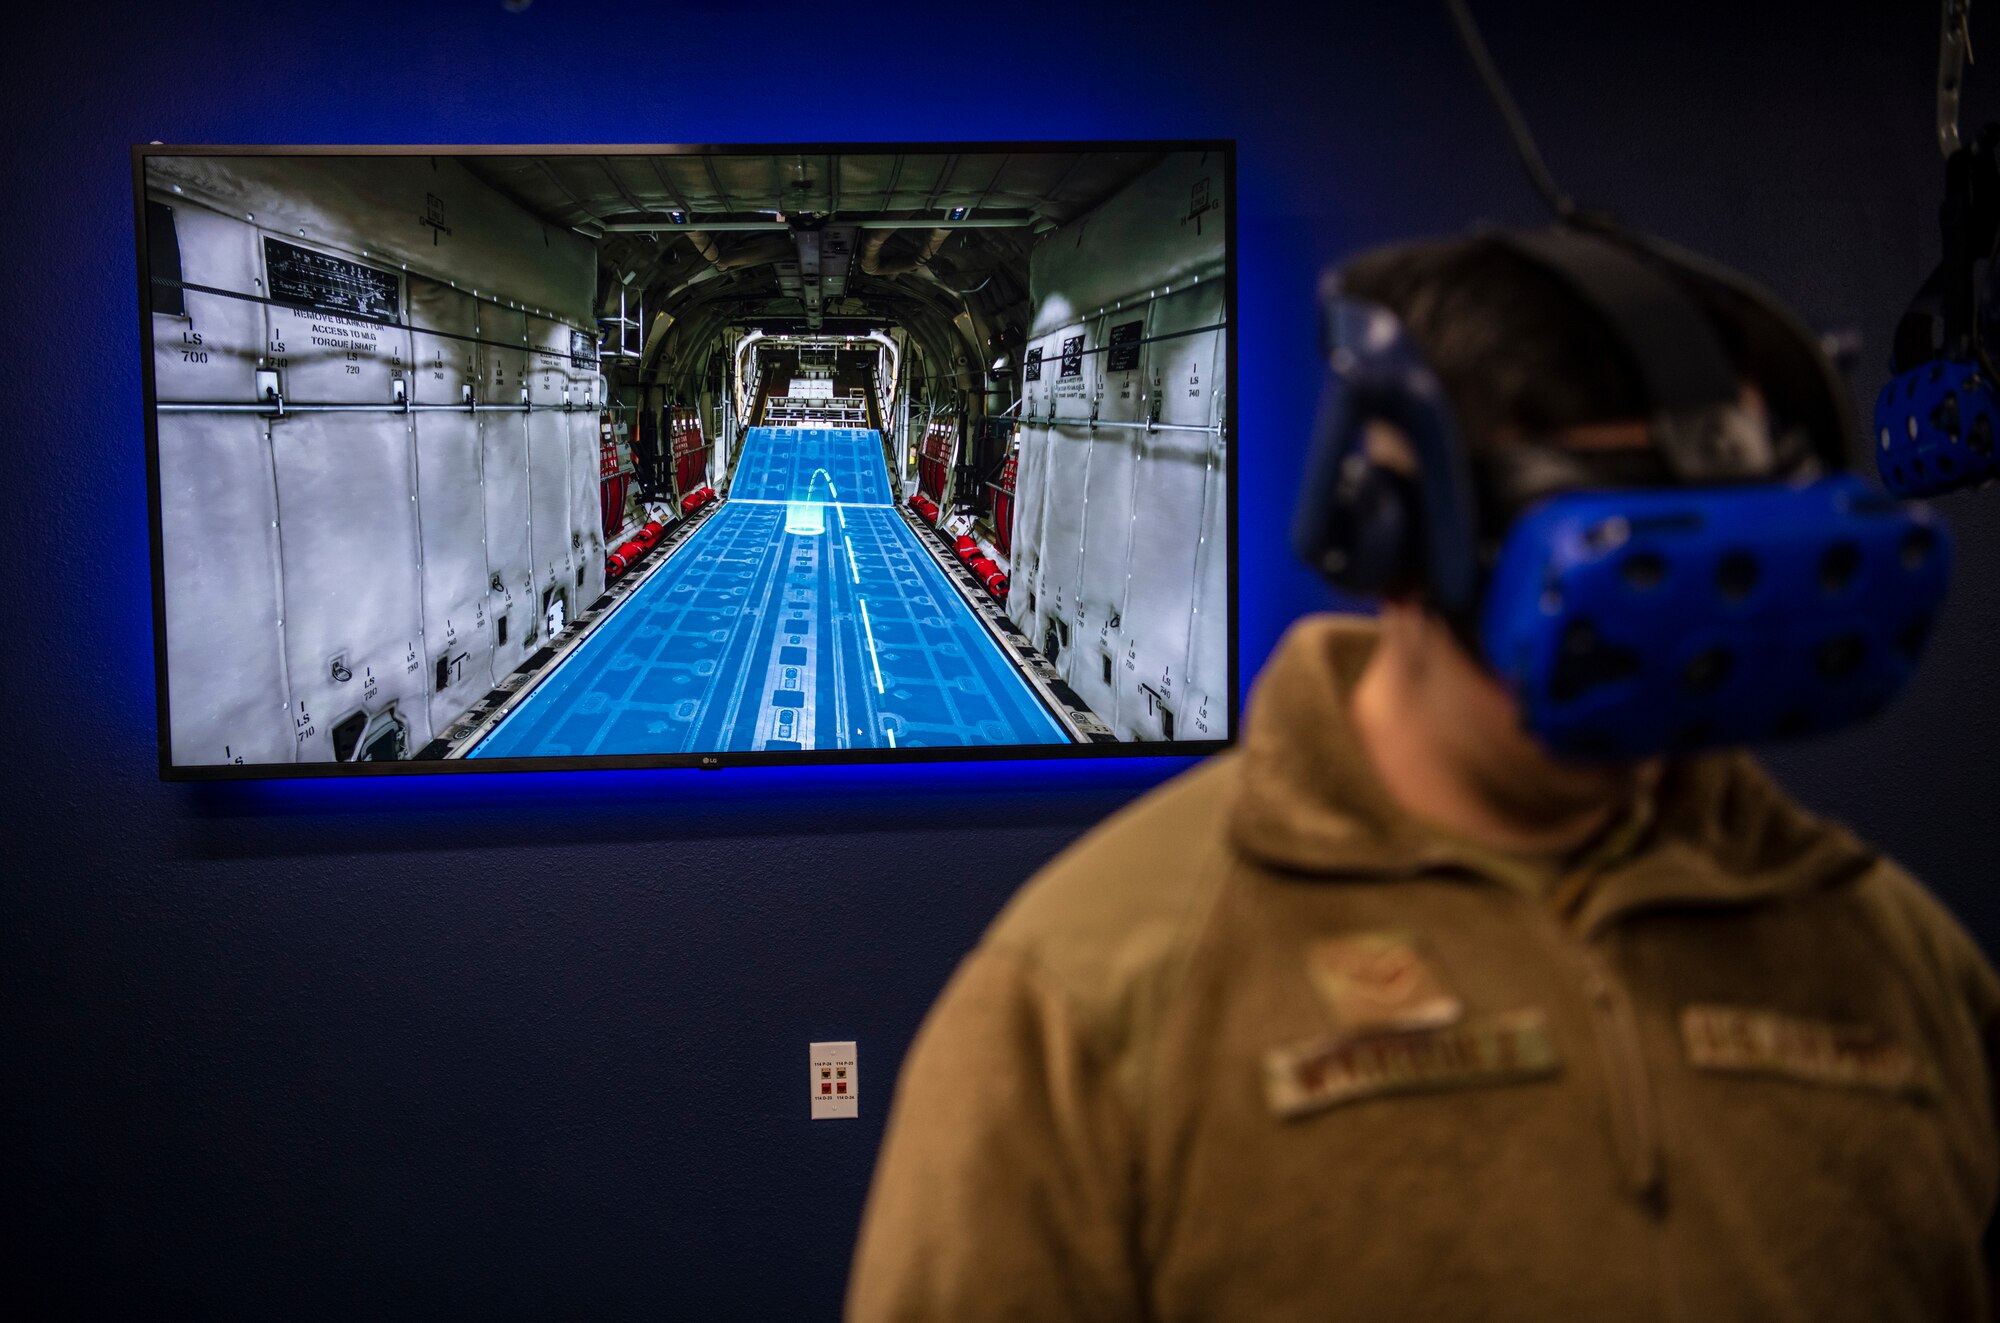 Senior Airman Ryan Marquez, 7th Civil Engineering Squadron firefighter, trains in a virtual reality headset in the 317th Maintenance Group’s VR Lab at Dyess Air Force Base, Texas, Jan. 20, 2021.